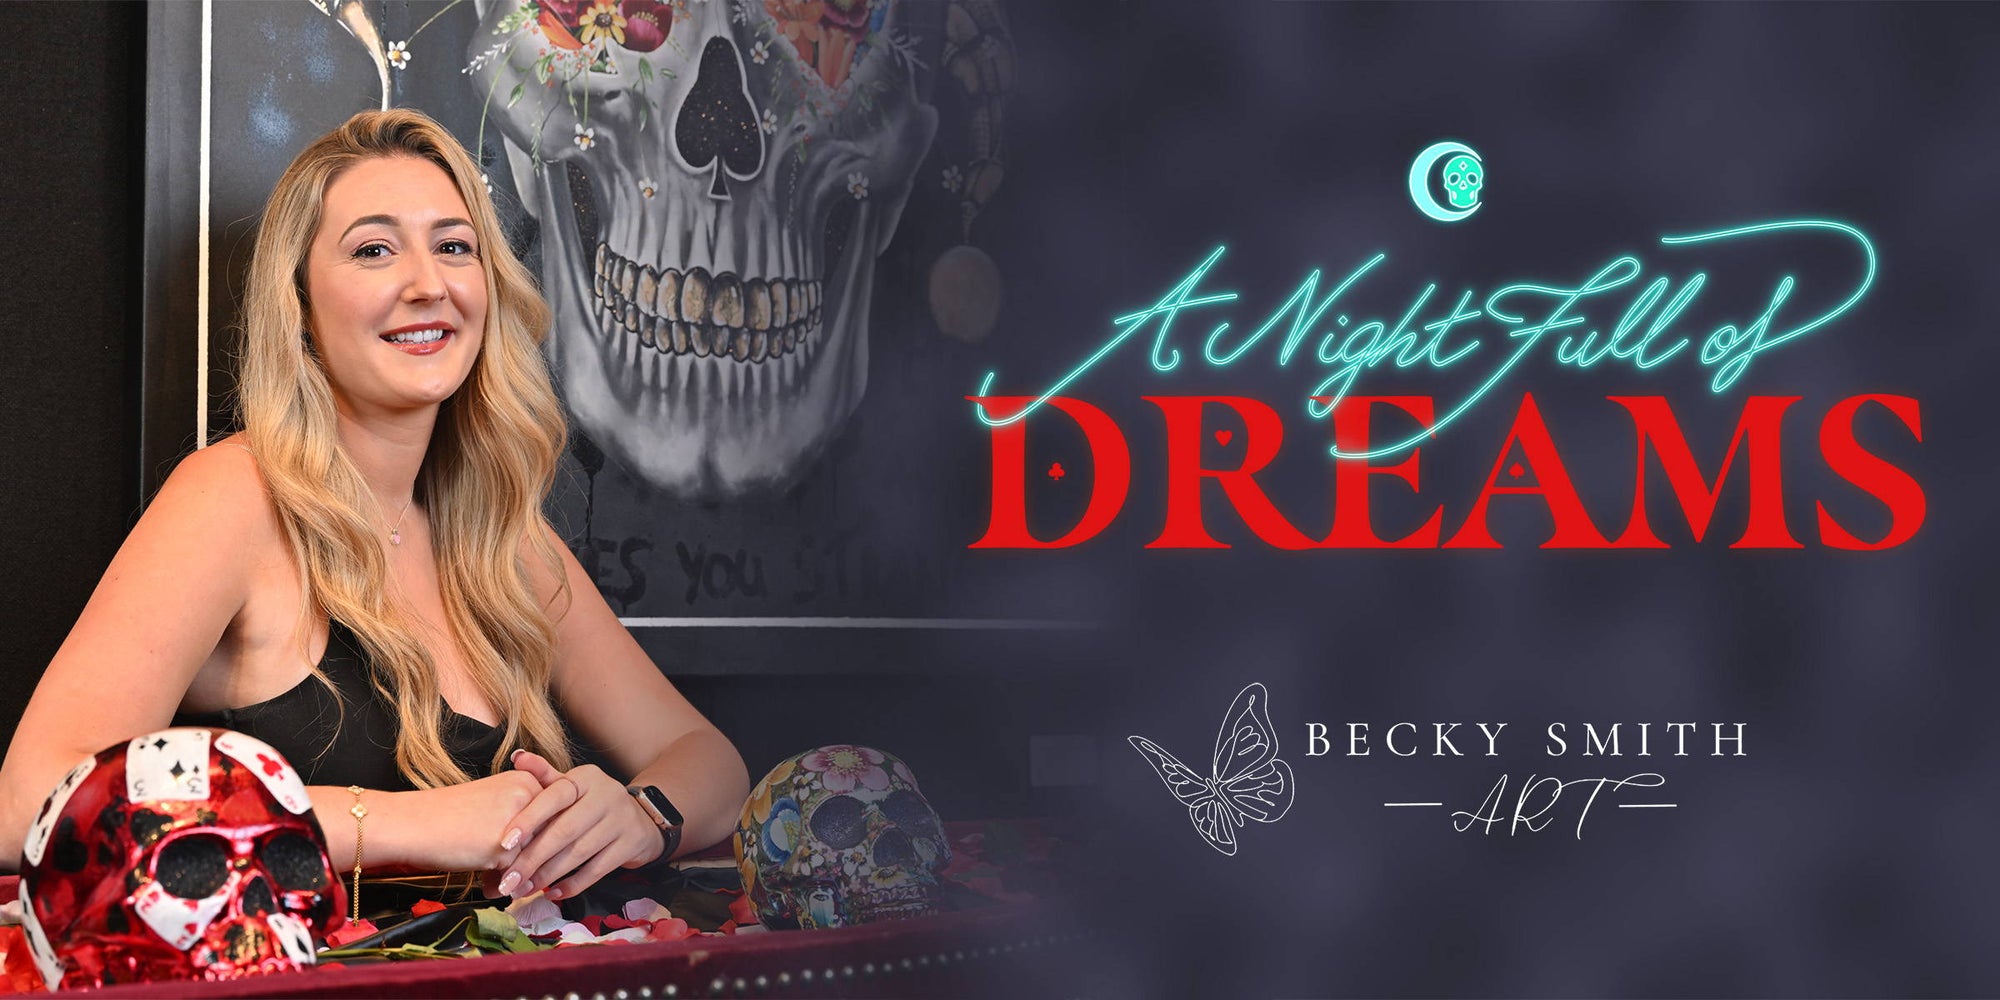 Becky Smith's "A Night Full of Dreams" - An Enchanting Art Exhibition